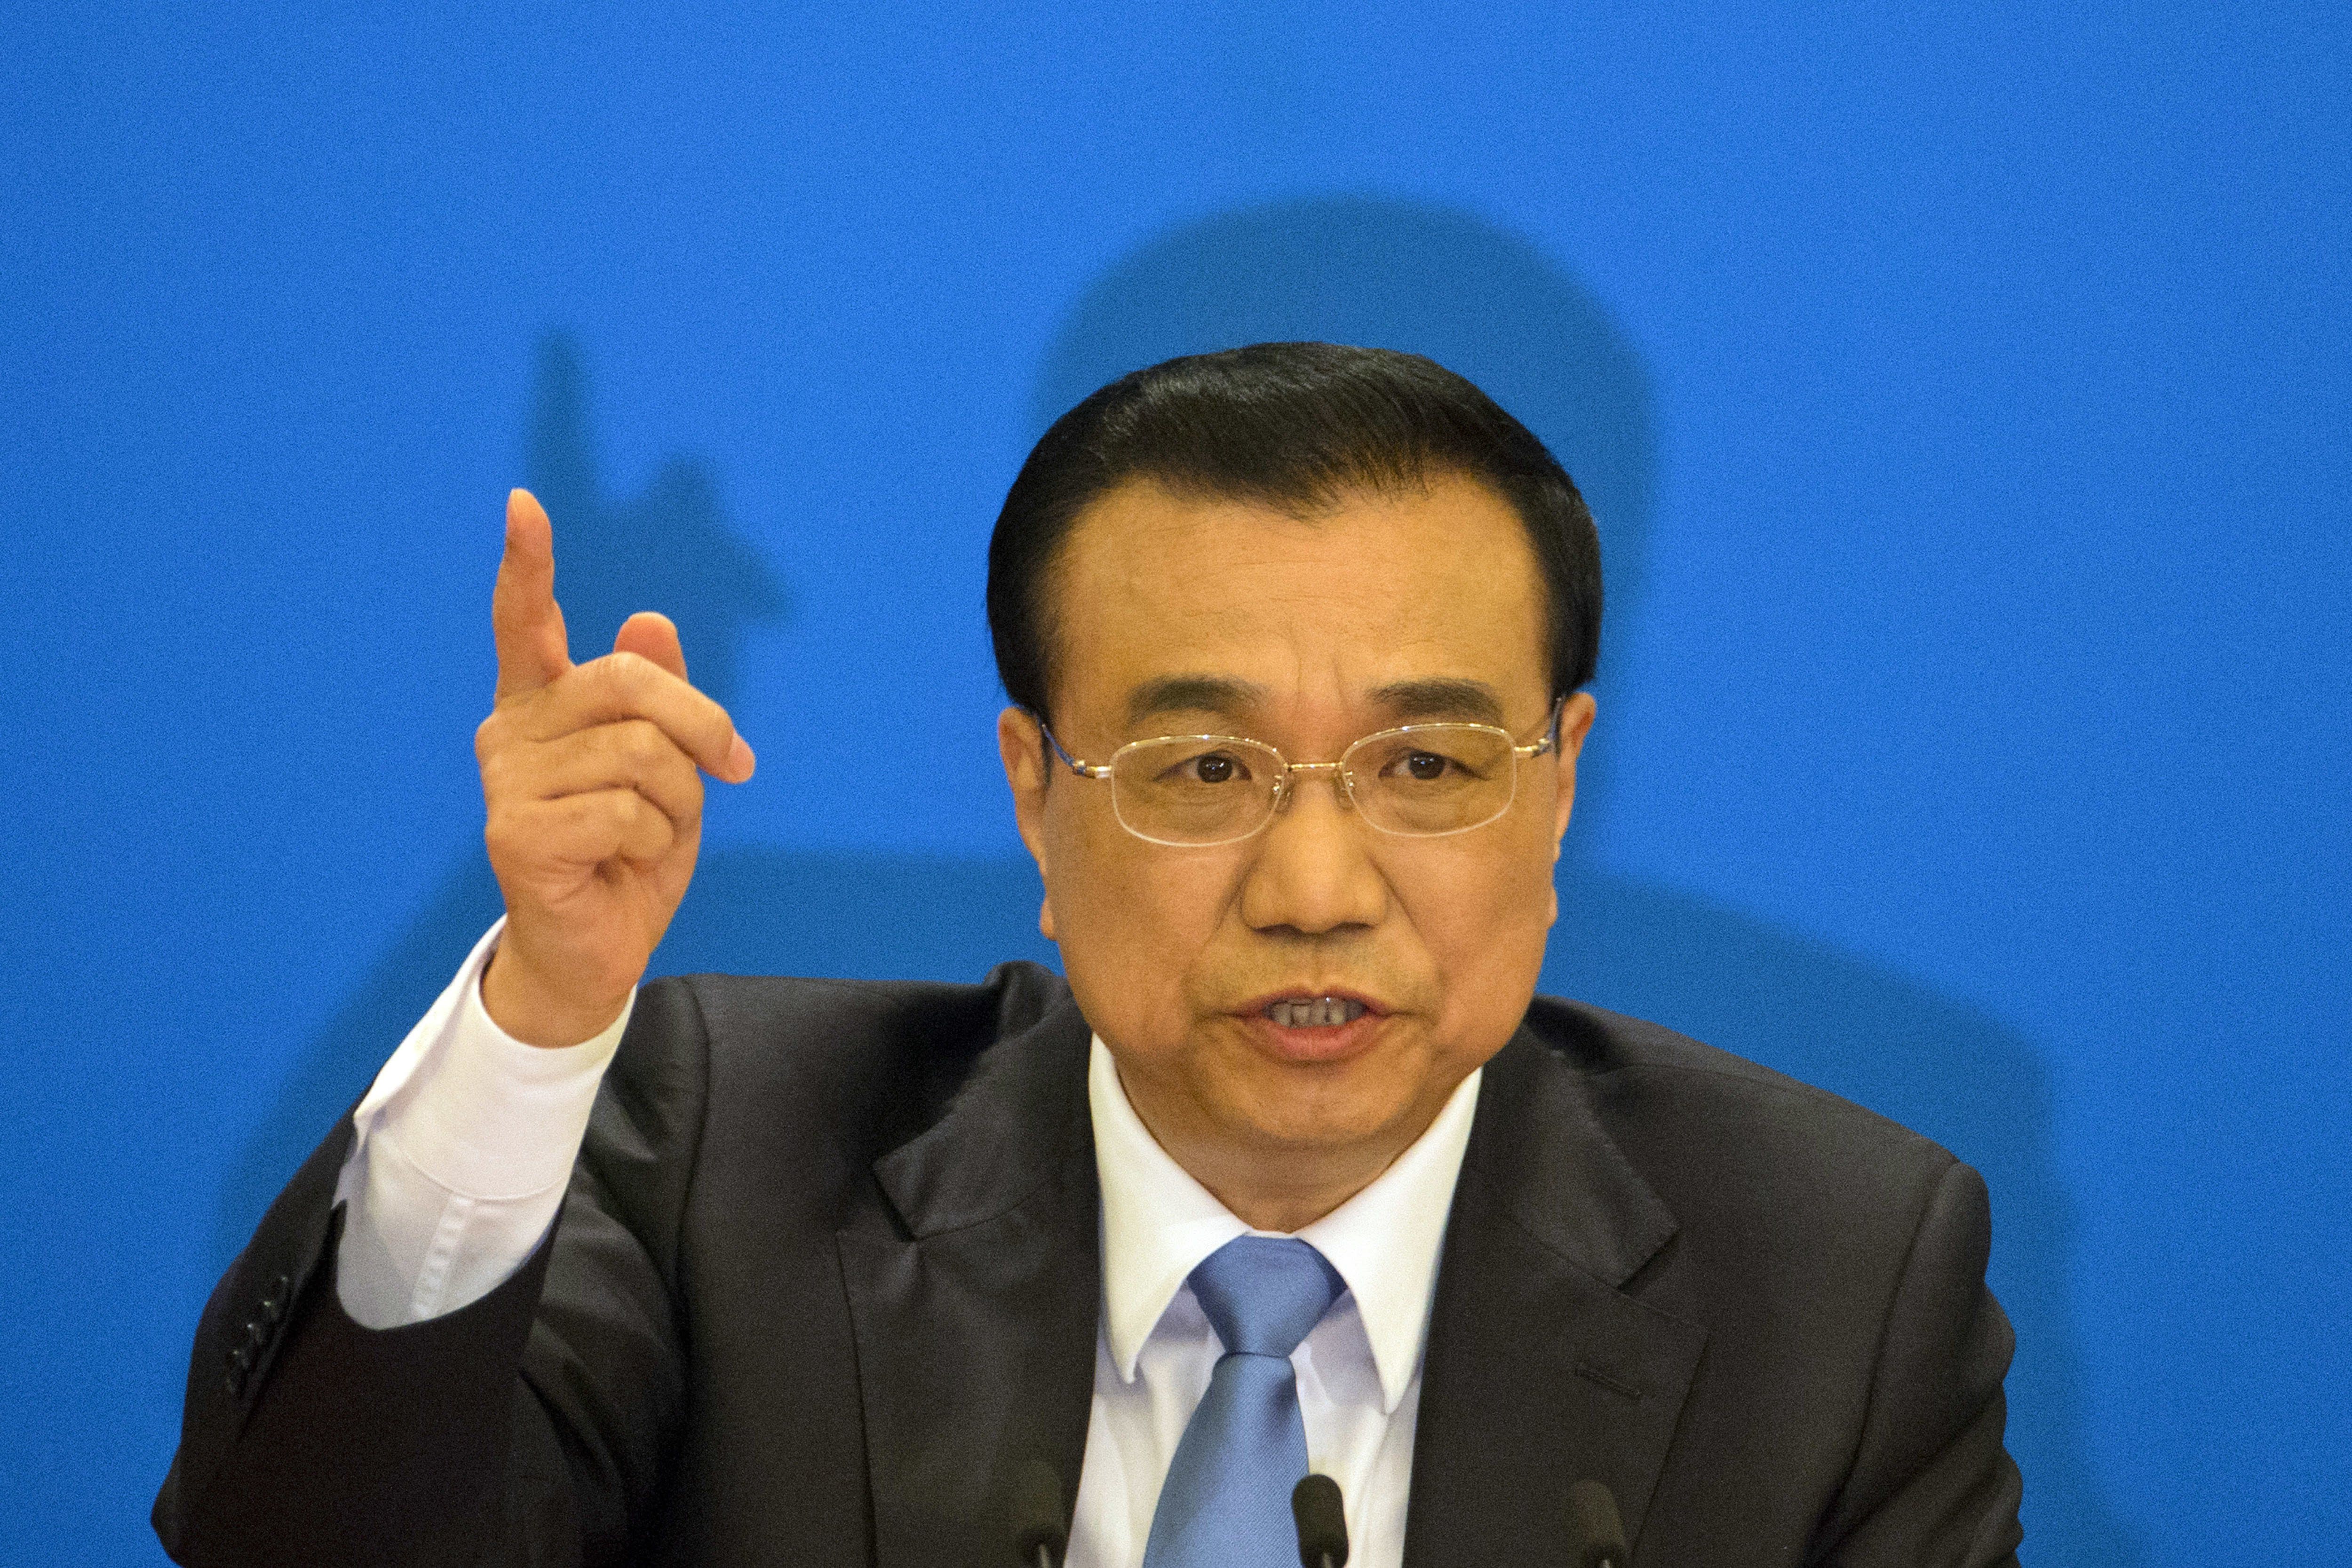 china-s-premier-li-keqiang-has-called-for-a-return-to-talks-on-north